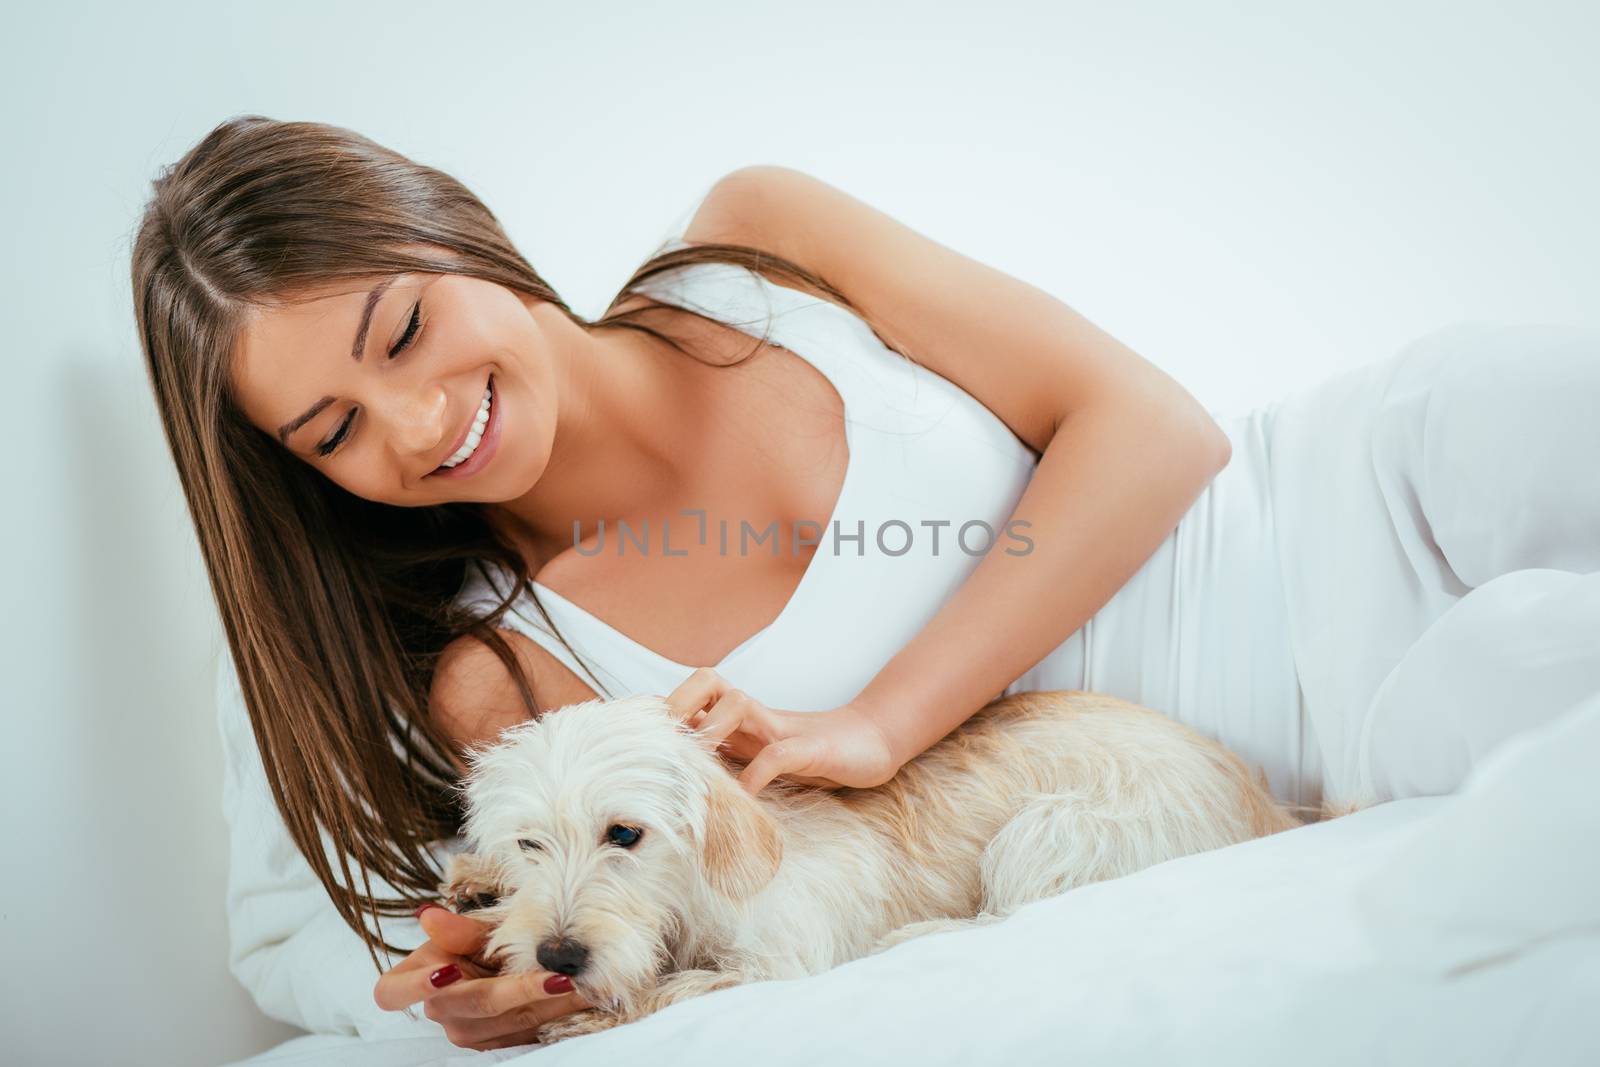 Girl And Dog In Bed by MilanMarkovic78